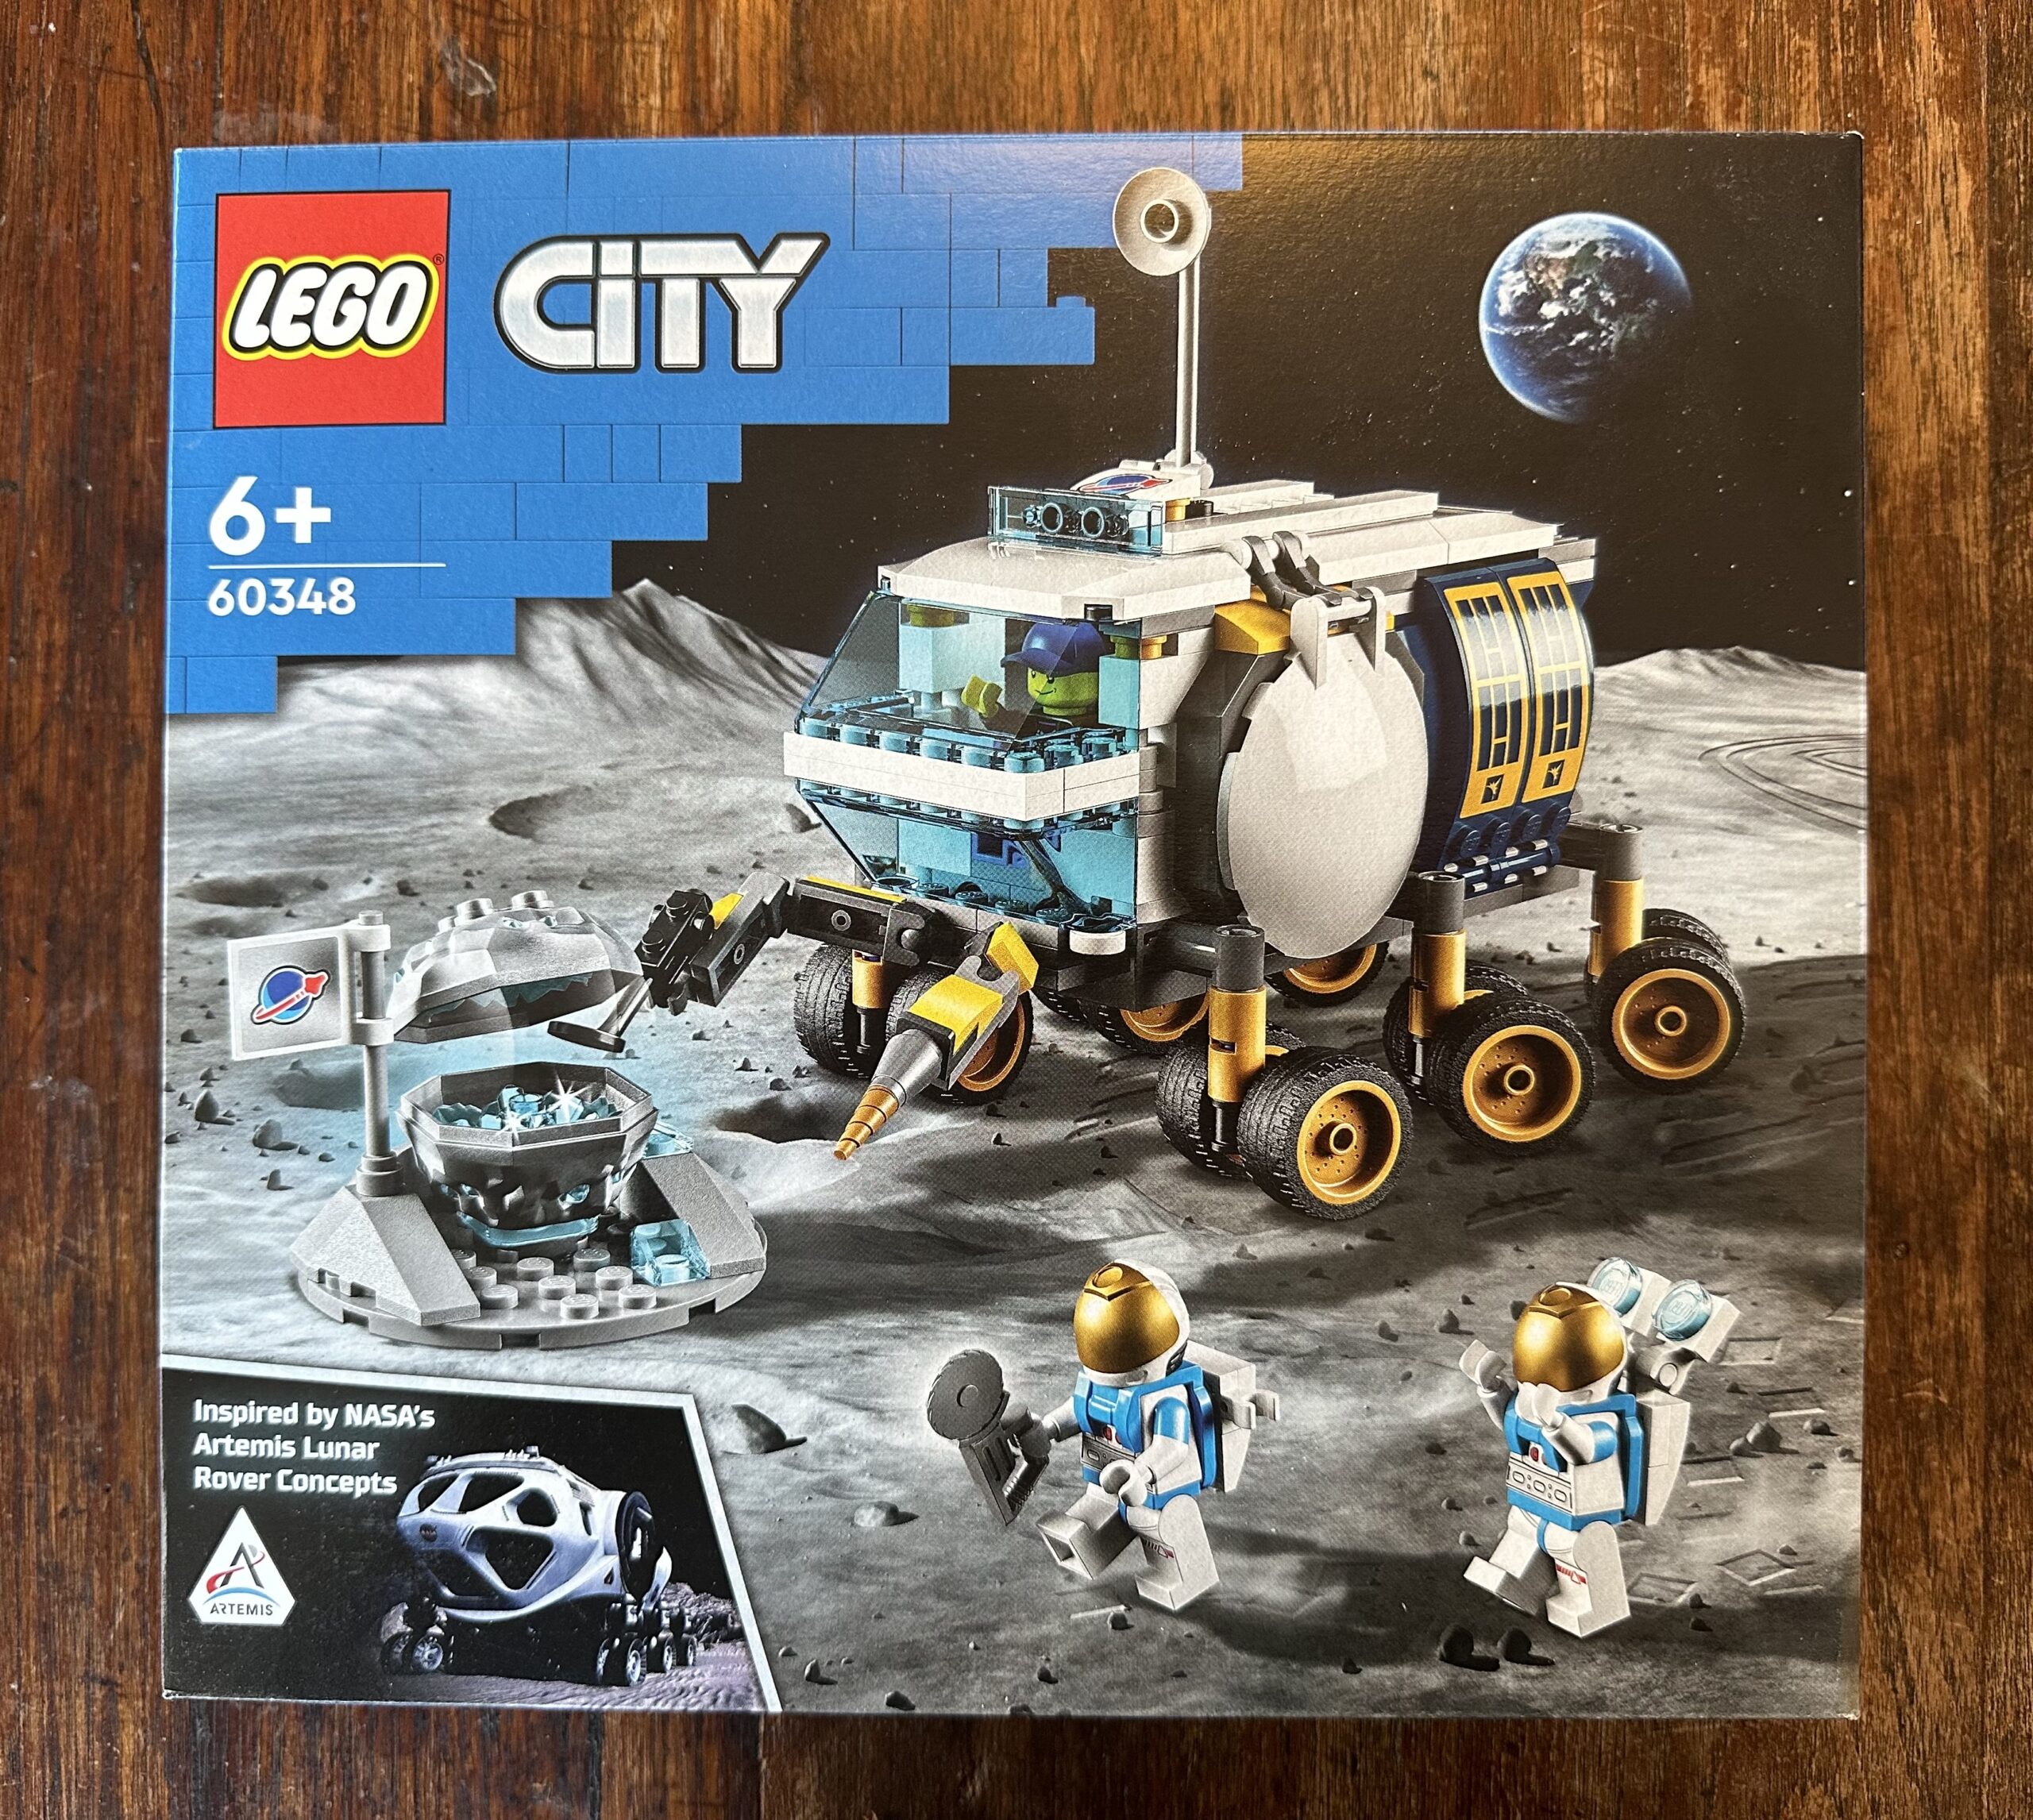 Unopened box for LEGO set 60348 Lunar Roving Vehicle. Inspired by NASA's Artemis Lunar Rover Concepts.